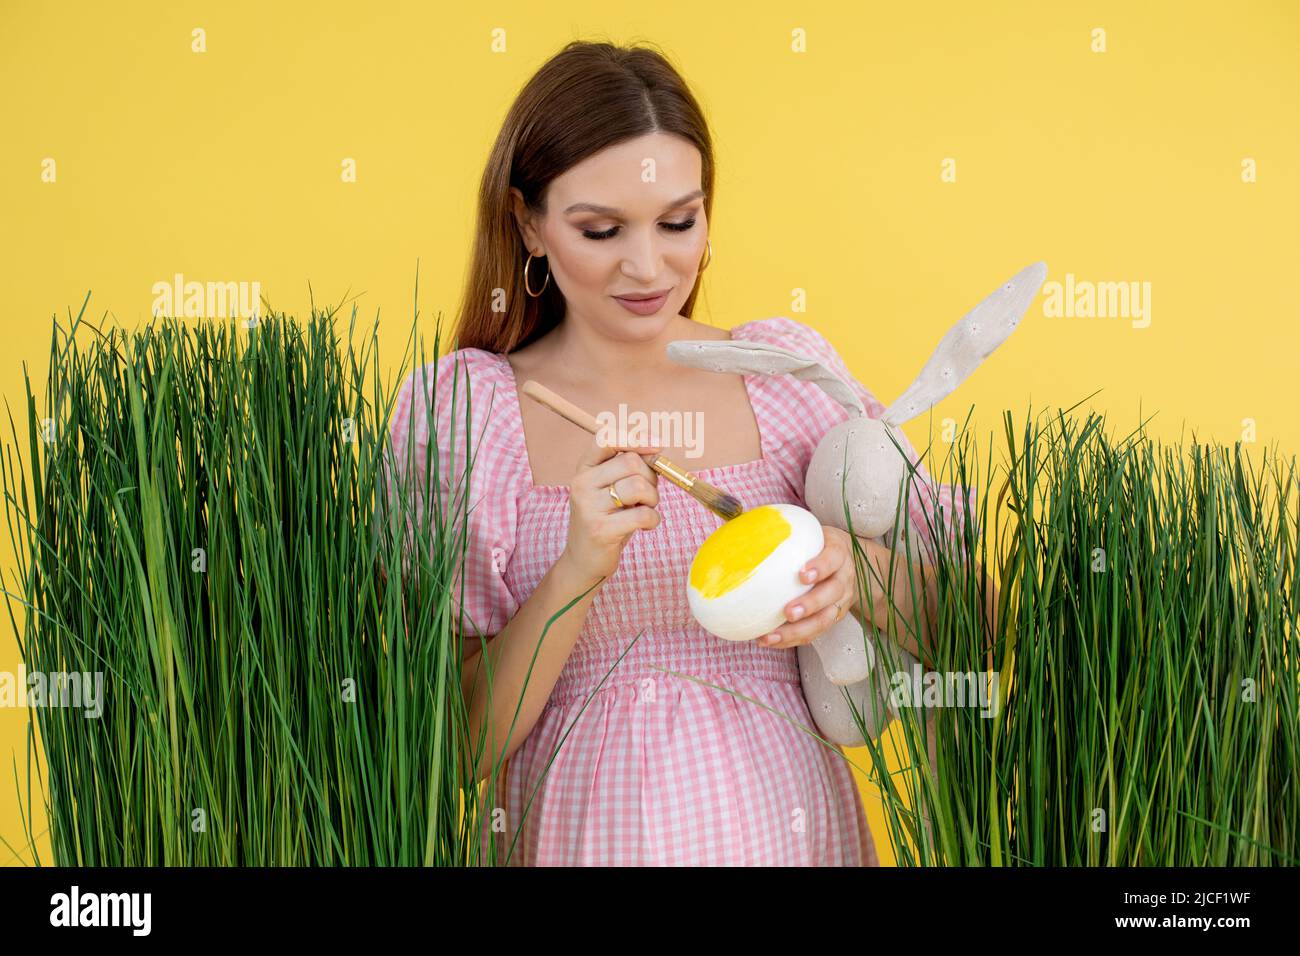 Happy woman in late pregnancy on grass decoration paint egg with brush and hold soft rabbit toy, yellow background. Portrait of young pregnant lady Stock Photo